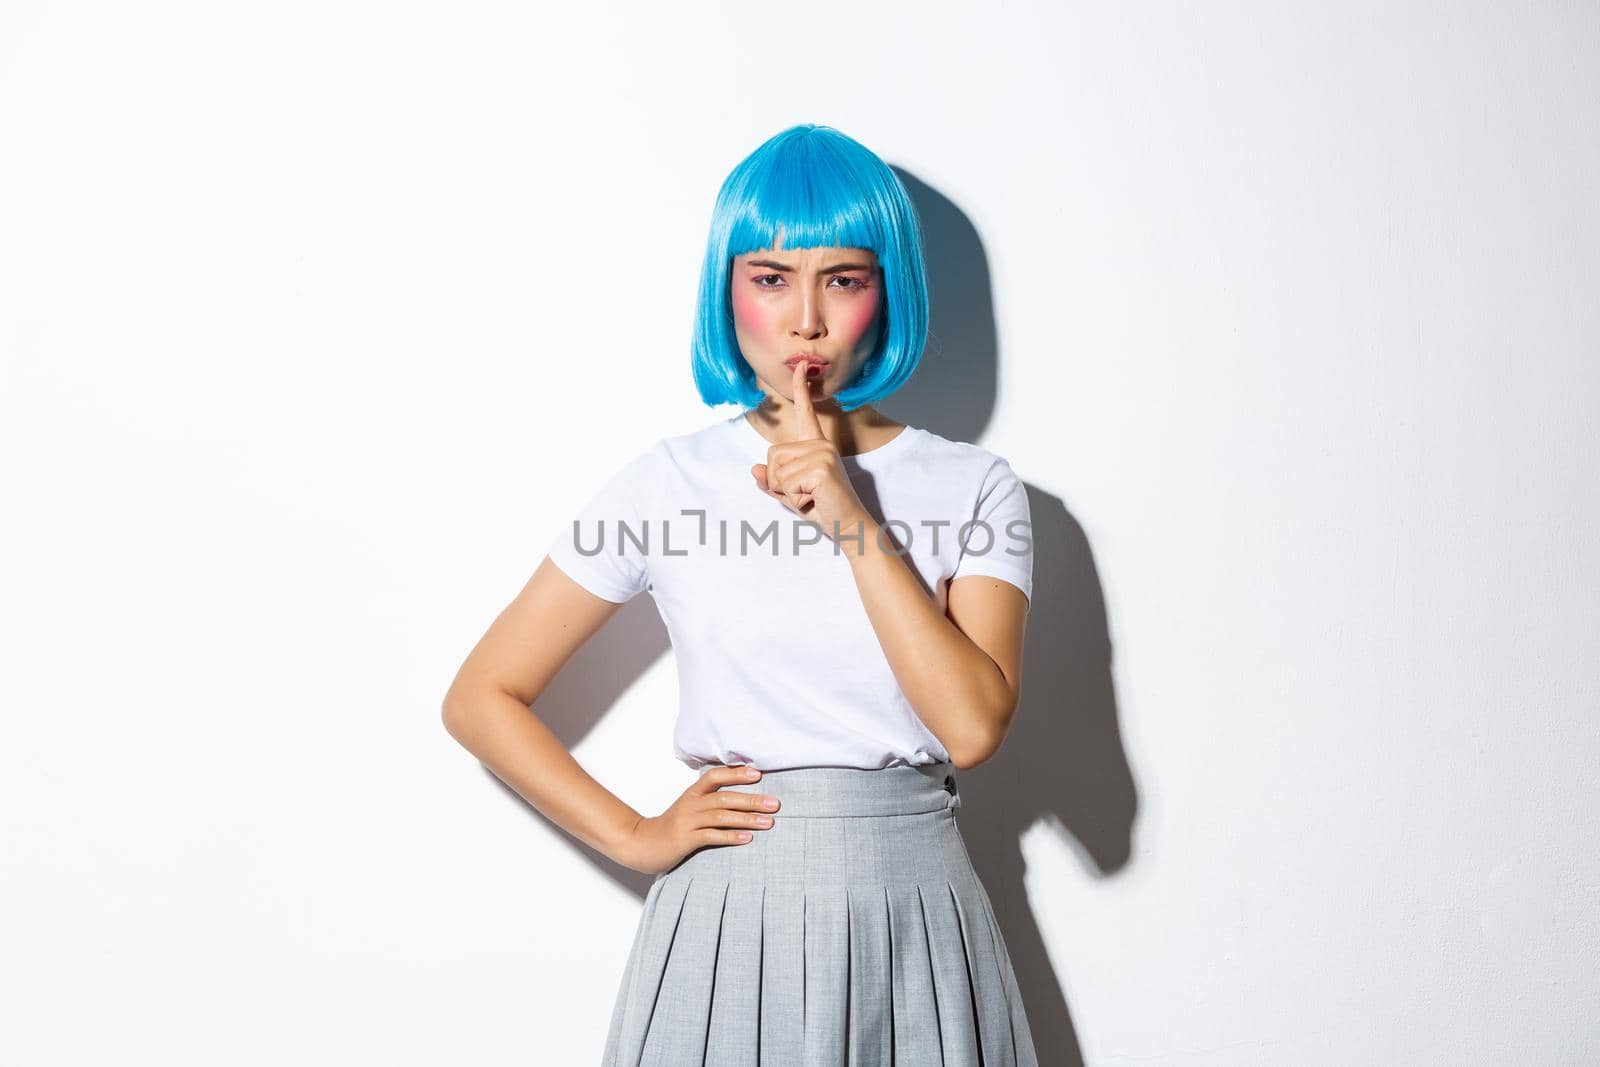 Angry disappointed asian girl scolding someone, shushing at camera and frowning mad, wearing blue wig for halloween party, standing over white background.